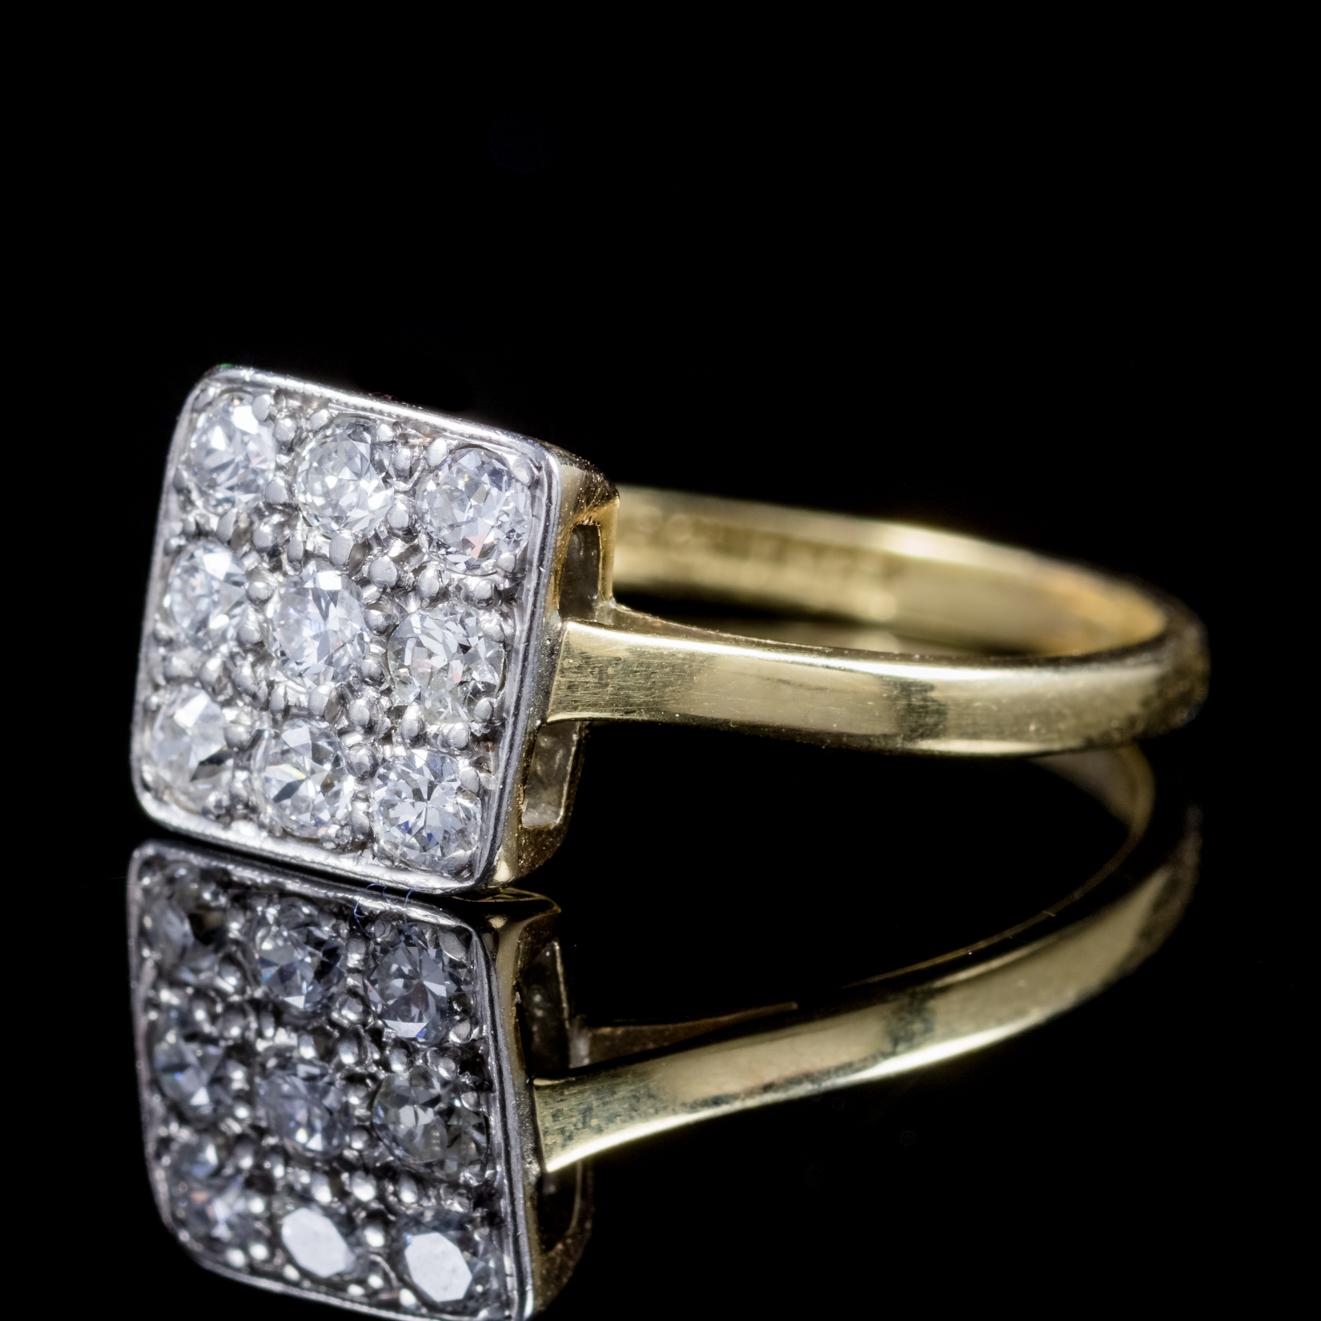 A stunning Art Deco cluster ring Circa 1920, set with a cluster of nine old cut Diamonds in a fabulous square gallery.

The Diamonds are beautiful, bright SI 1 clarity – H colour Diamonds – around 0.45ct in total. 

Old Cut Diamonds are known to